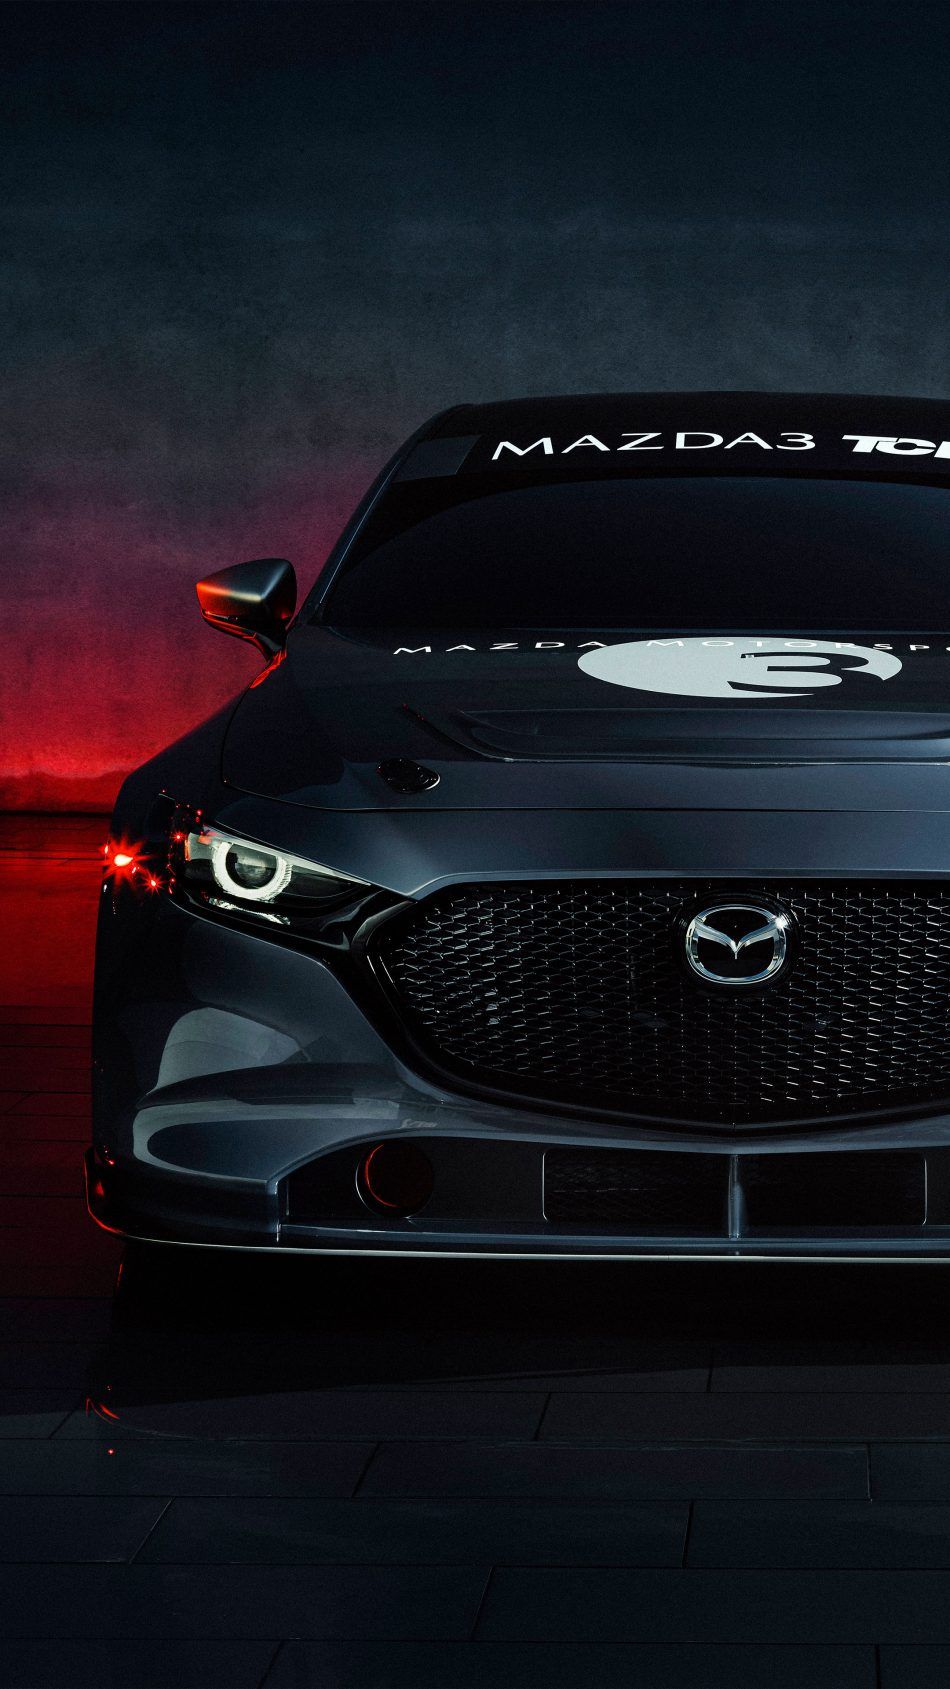 Mazda Wallpaper Online Discount Shop For Electronics Apparel Toys Books Games Computers Shoes Jewelry Watches Baby Products Sports Outdoors Office Products Bed Bath Furniture Tools Hardware Automotive Parts Accessories